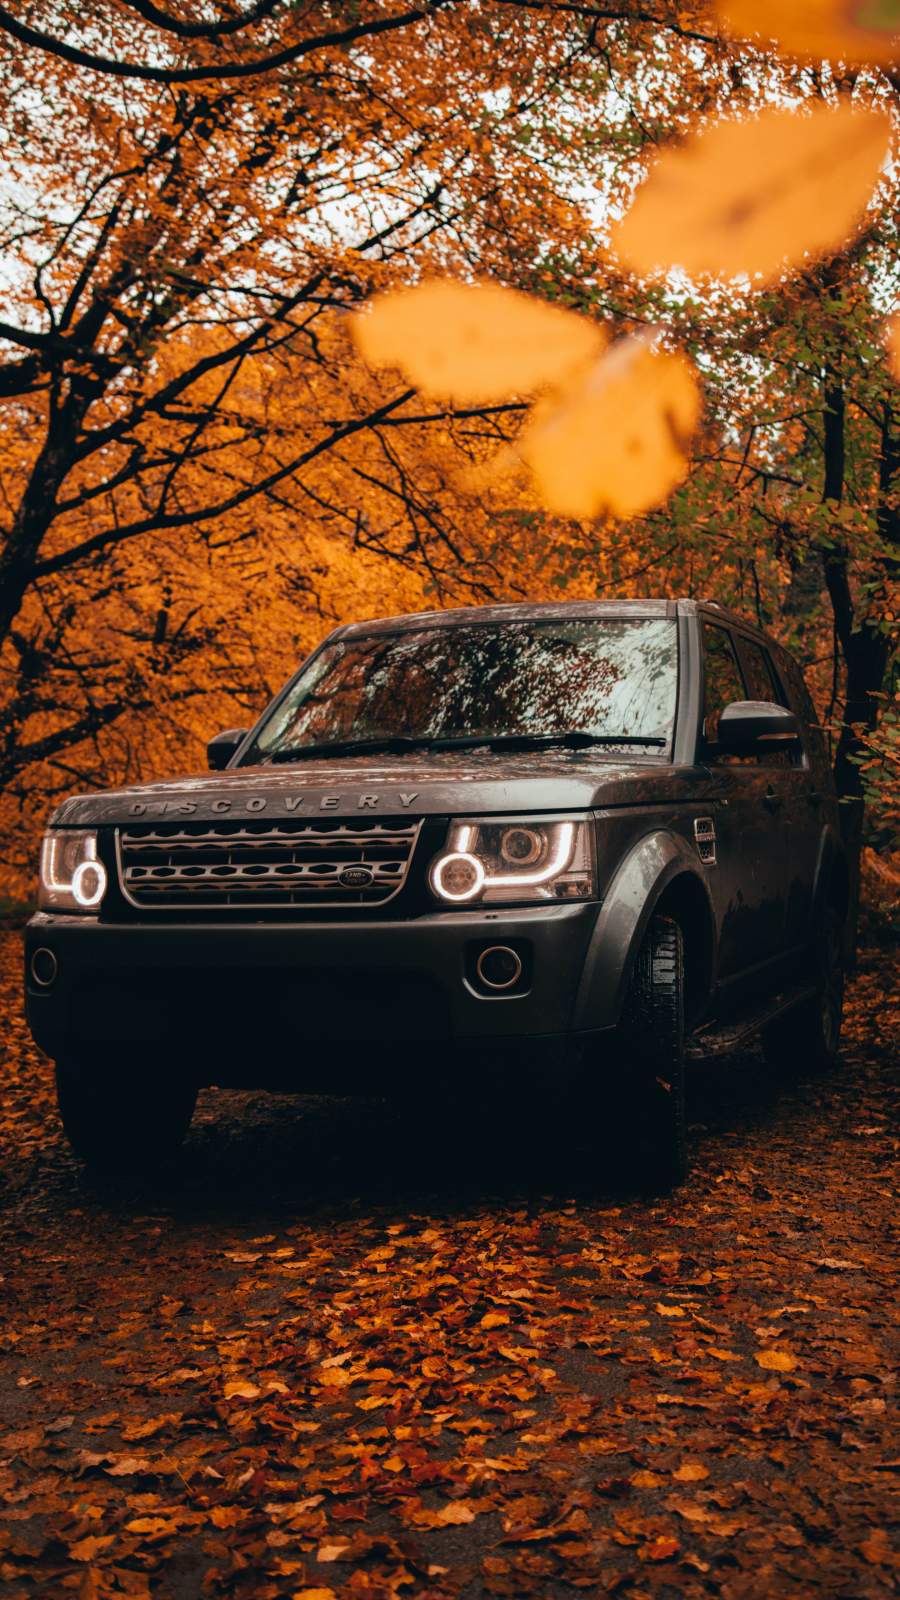 Land Rover Discovery Autumn